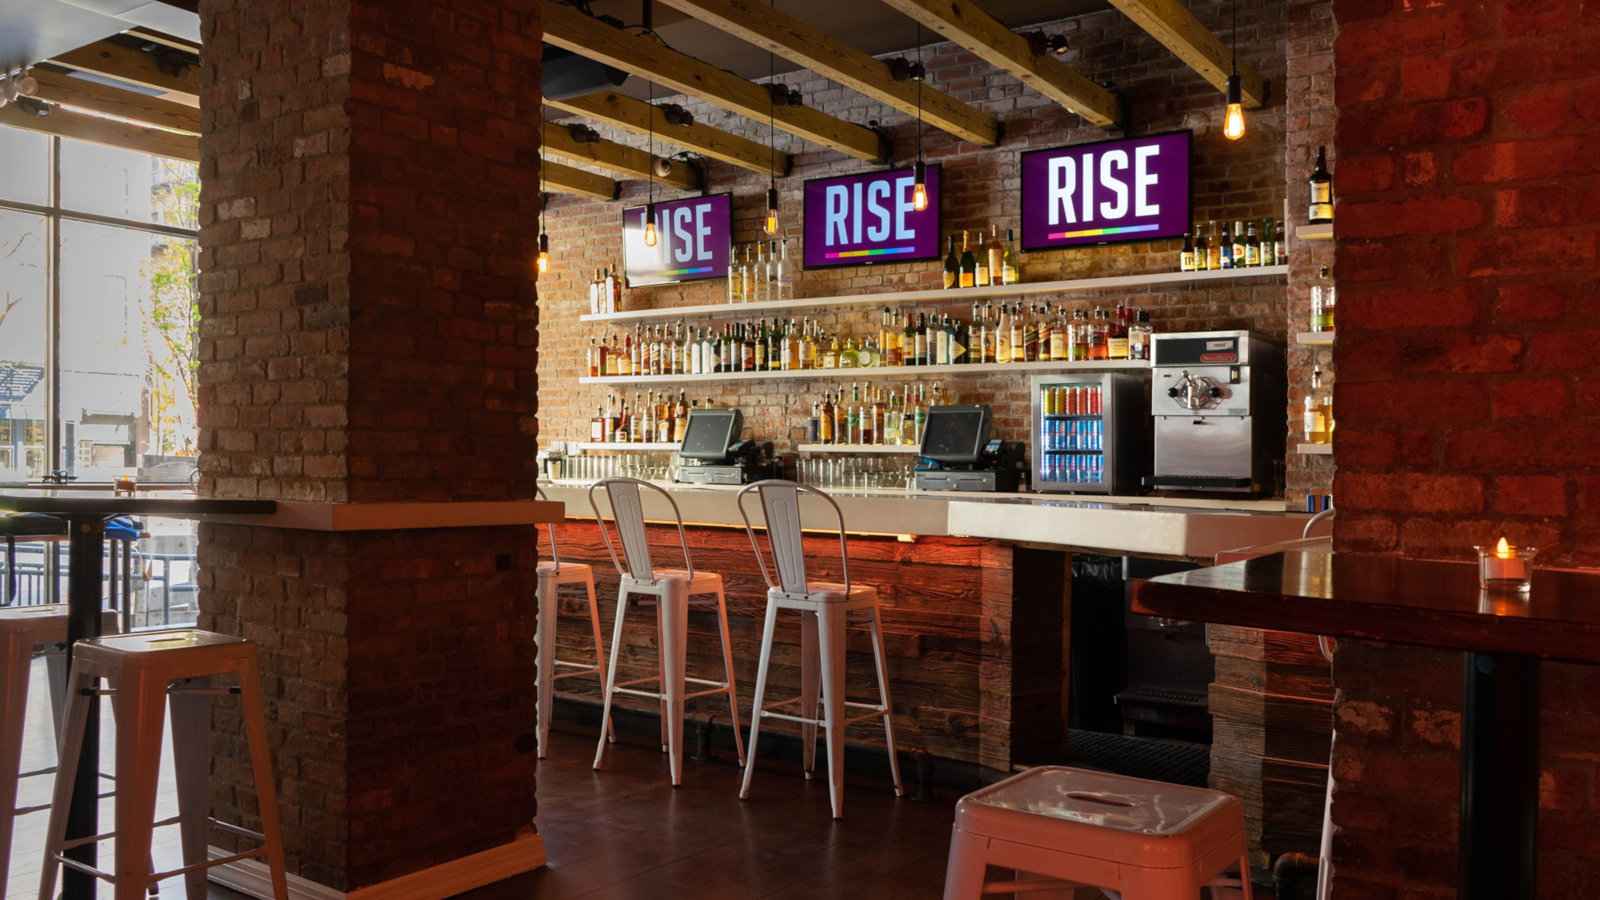 Rise Bar is one of the best gay bars in New York City that gets packed with fun